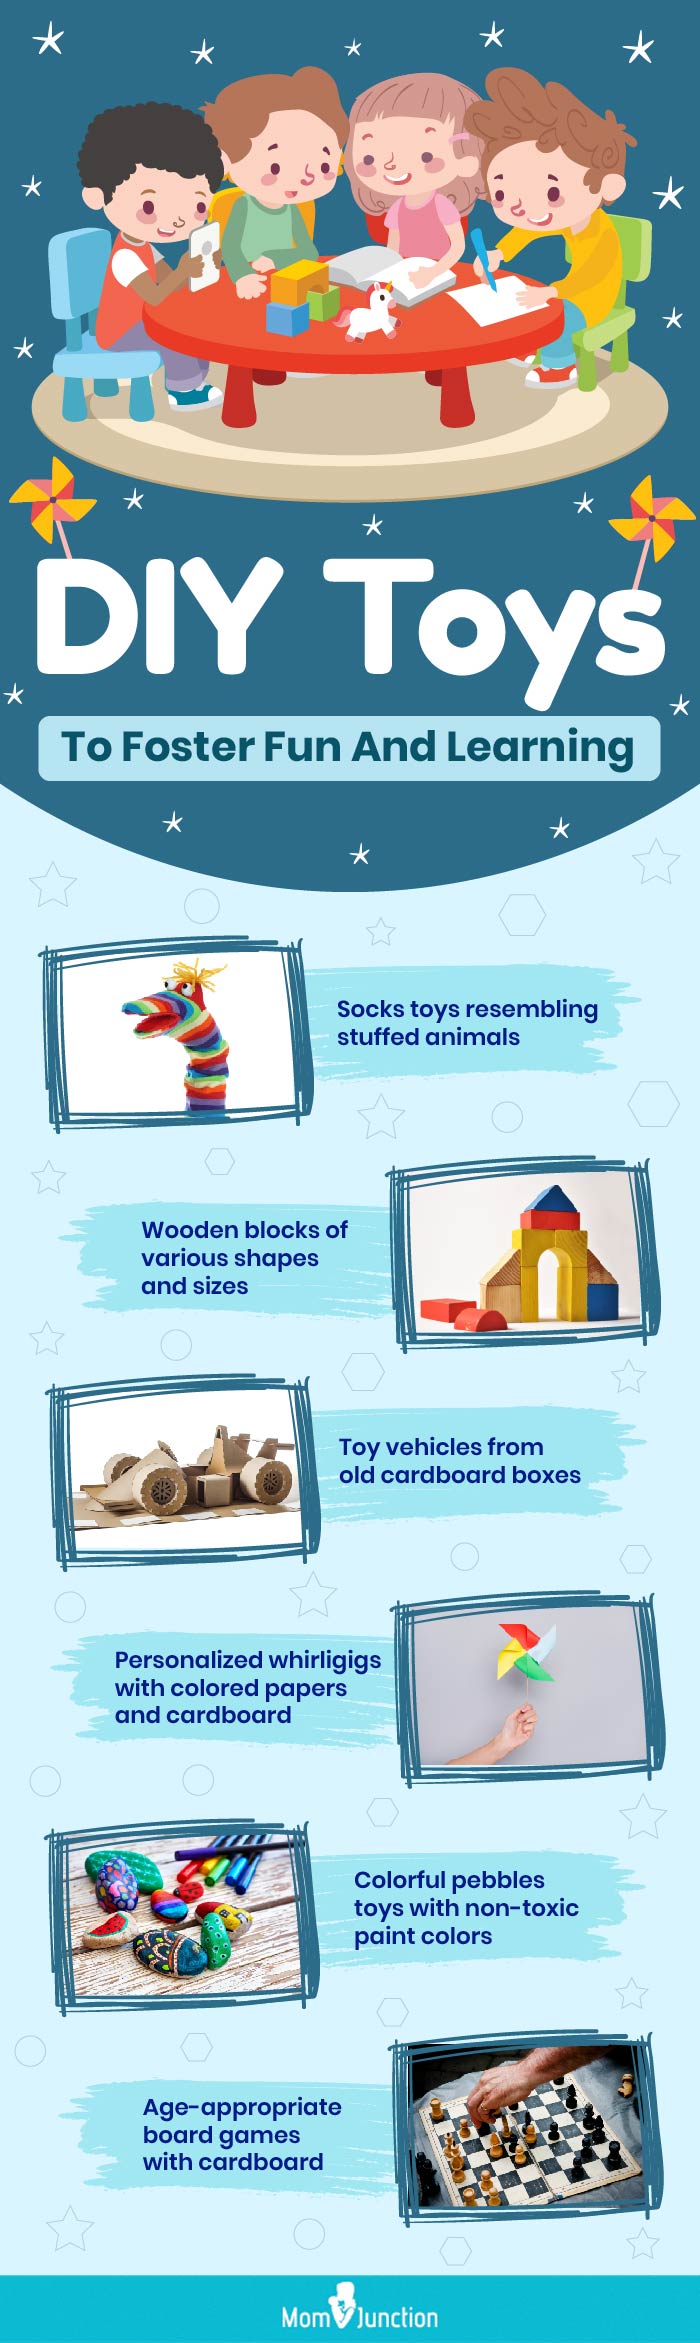 diy toys to foster fun and learning (infographic)